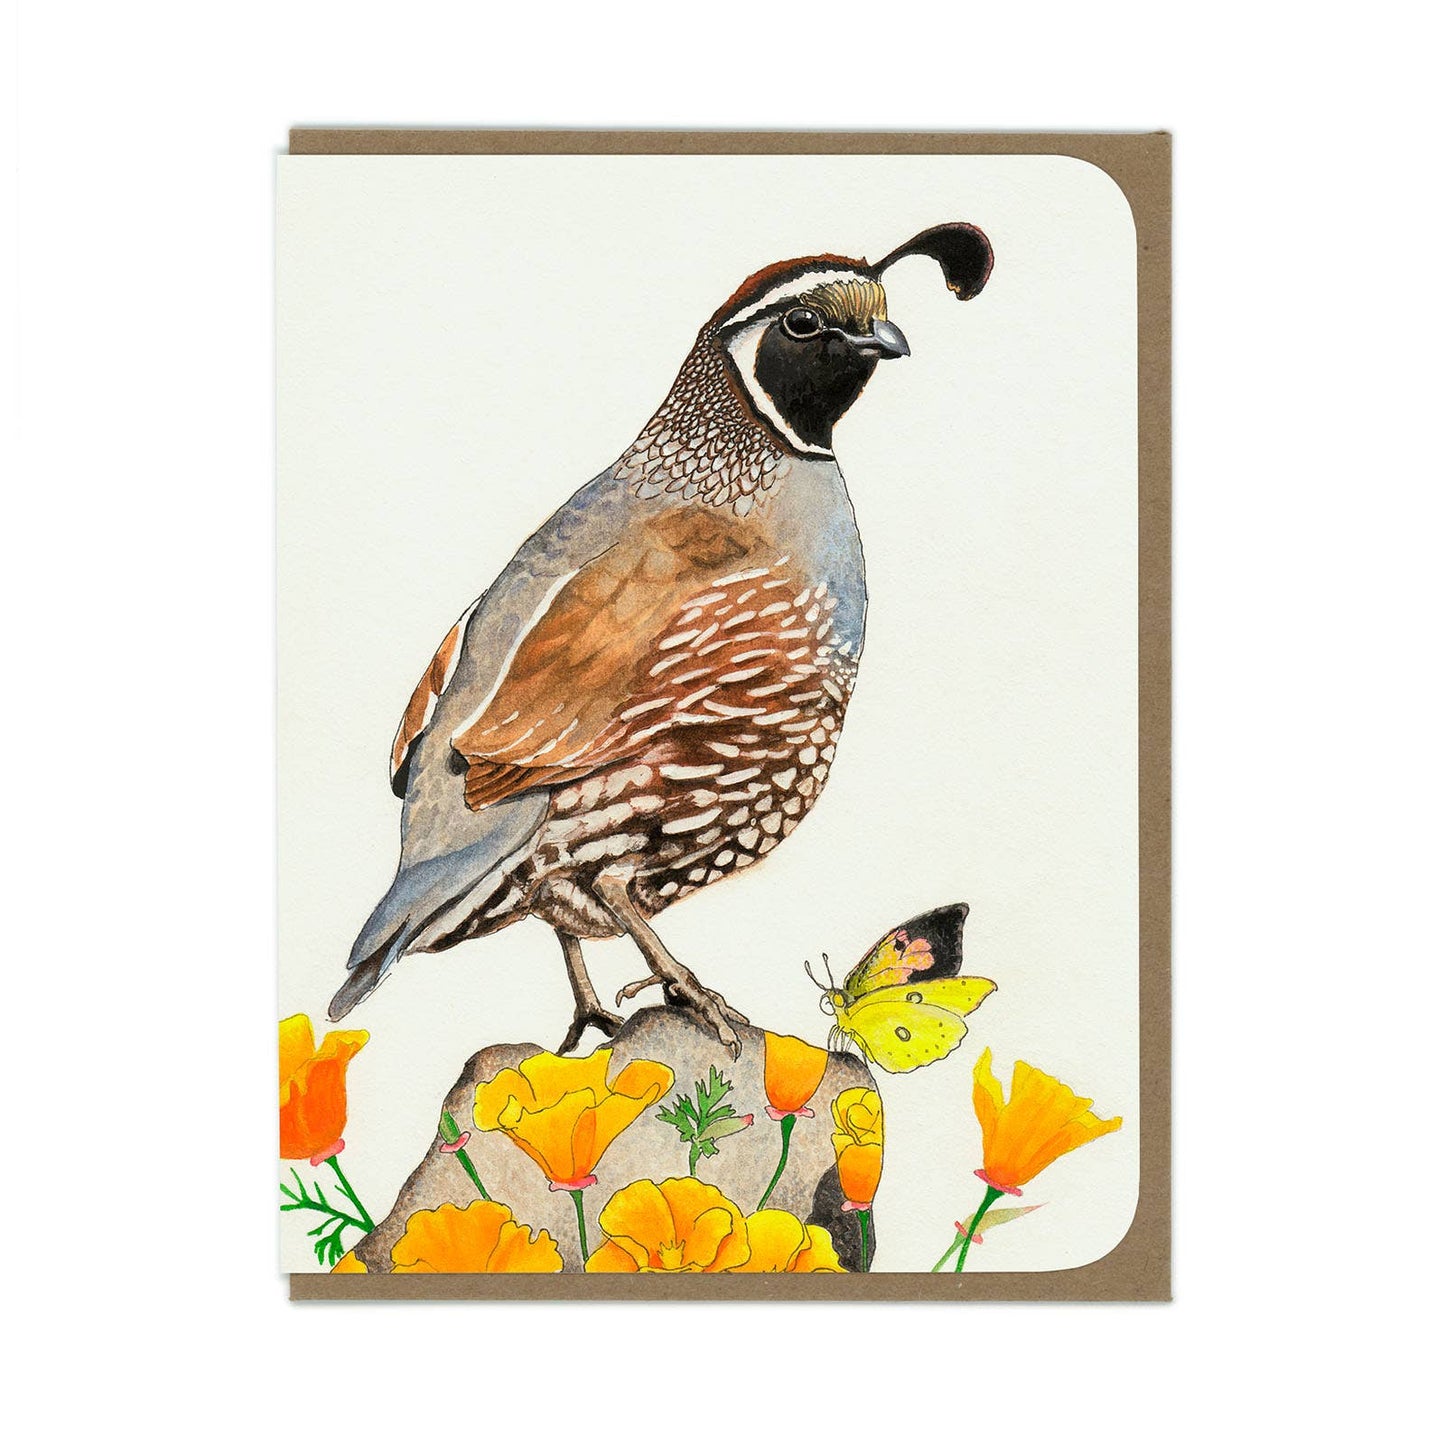 Quail and Poppies Greeting Card